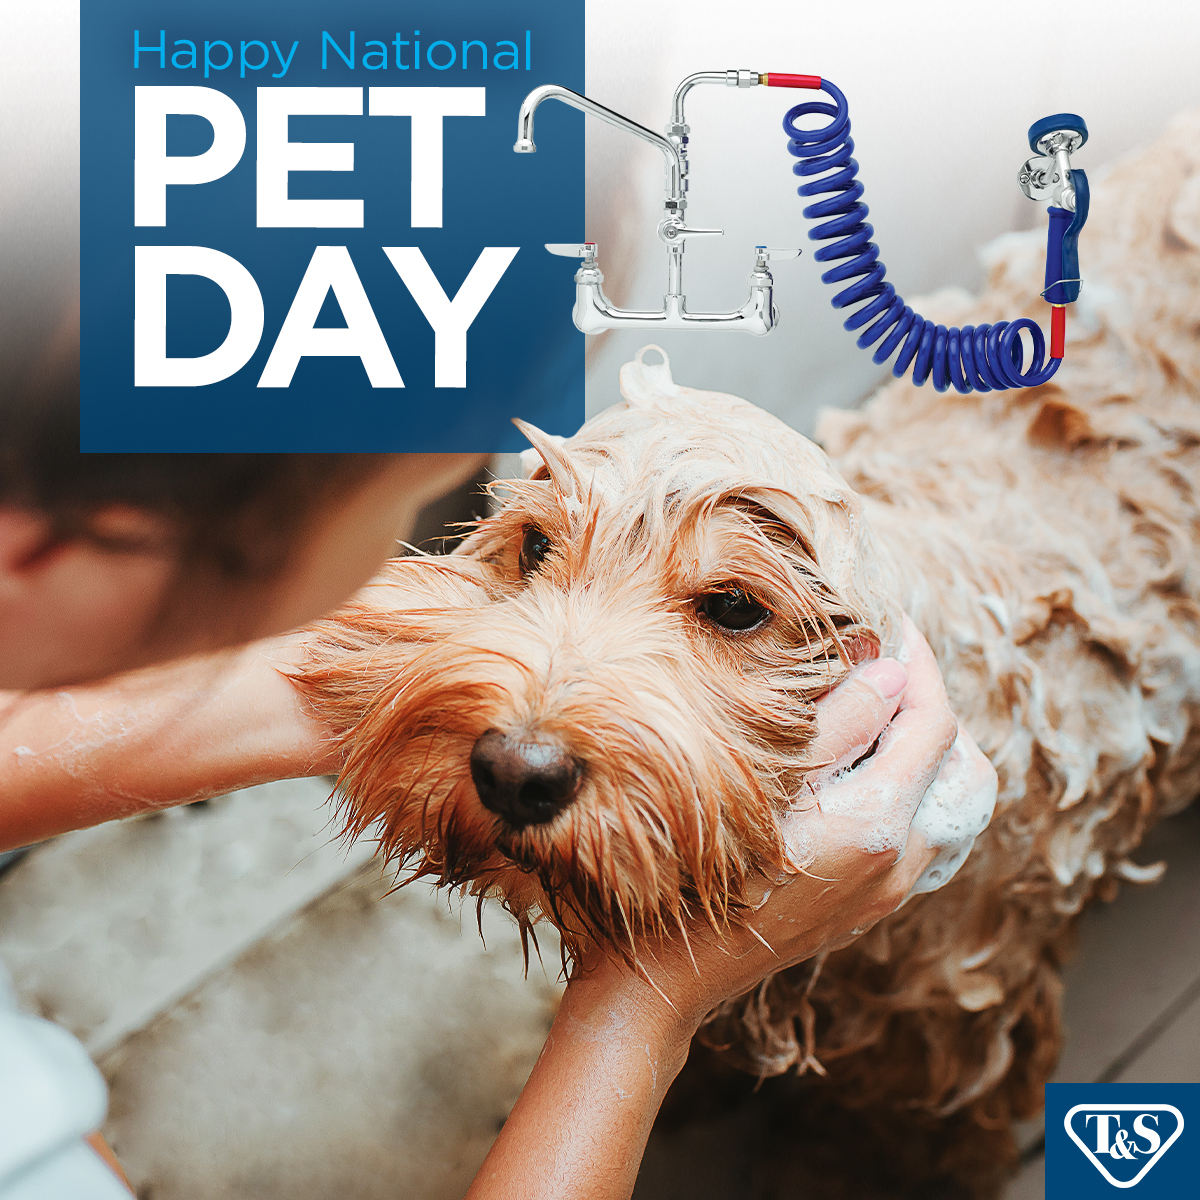 🐾 Happy National Pet Day! Celebrate the bond between pets and their humans with T&S's durable and innovative pet products. From cutting-edge hose reel systems designed to faucets with sprayers - we've got it covered. bit.ly/3P1r6Ga #NationalPetDay #PetProducts